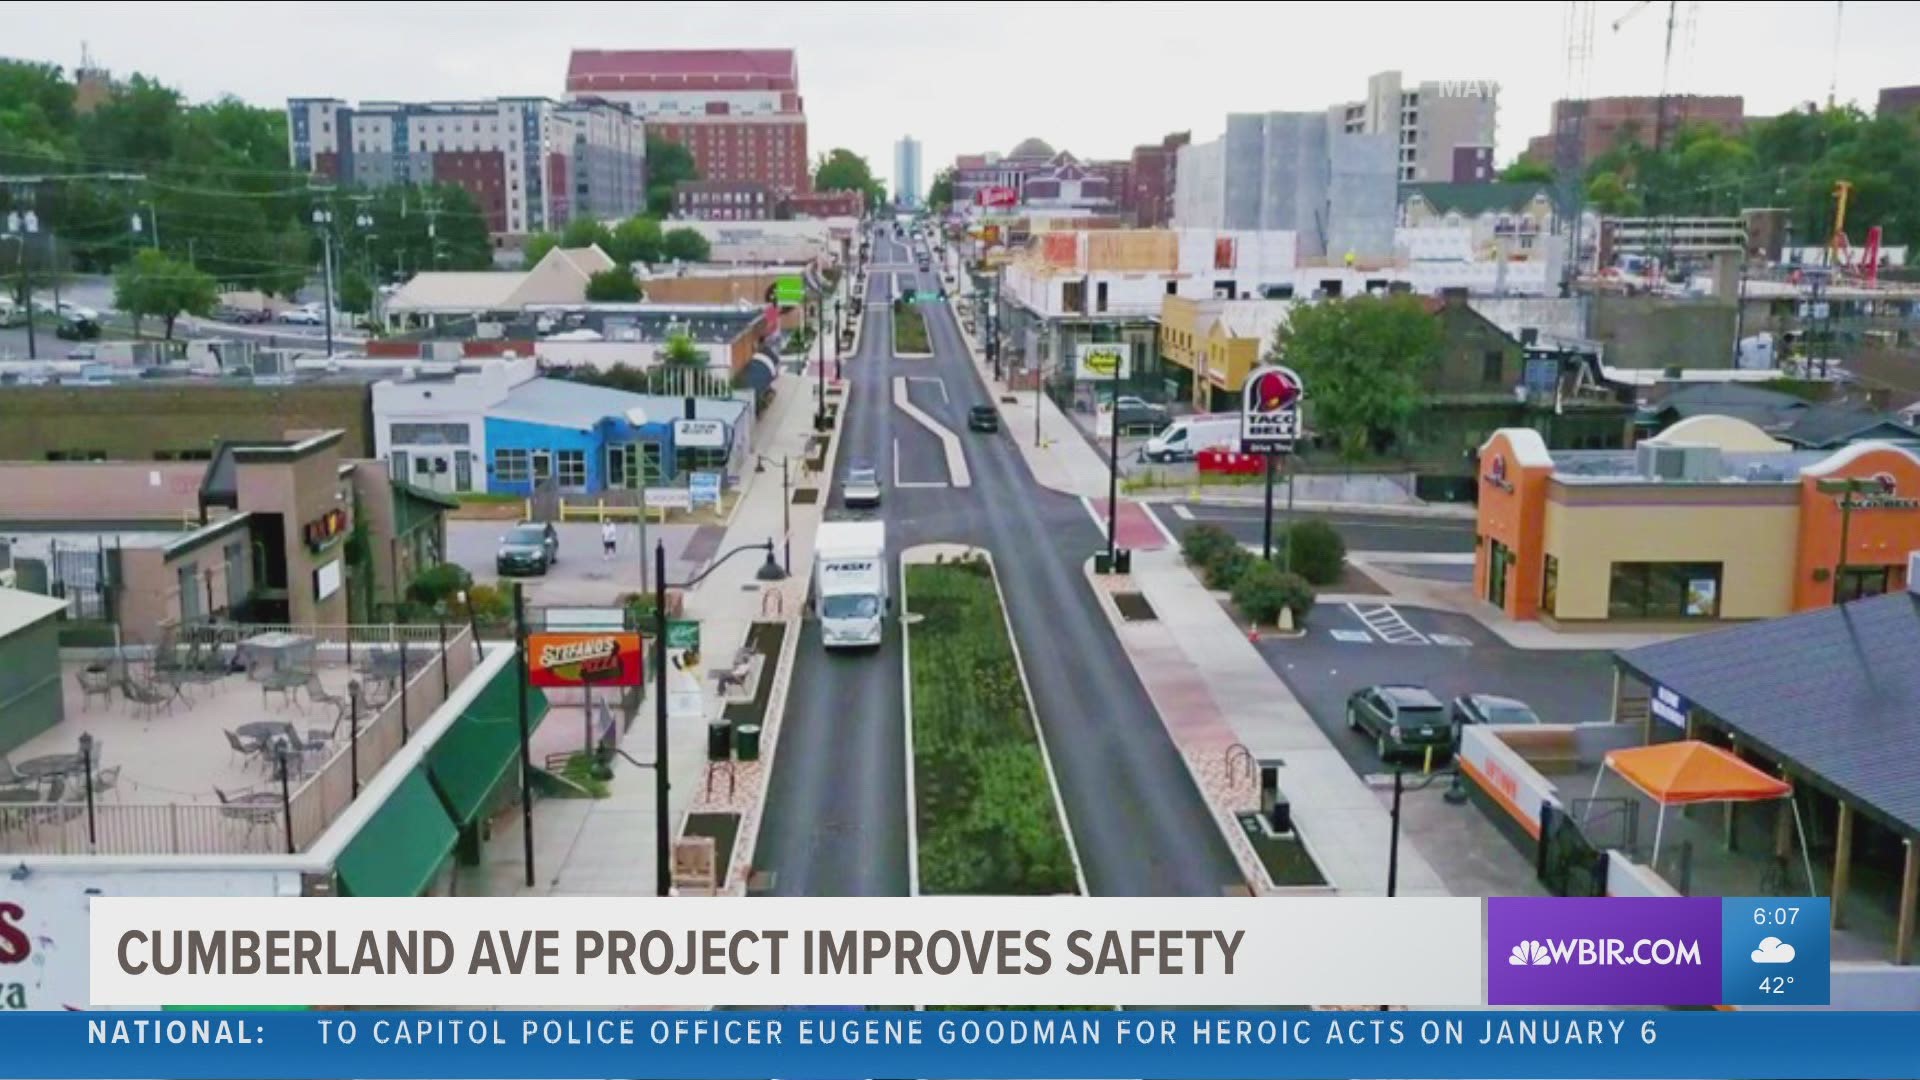 This is the finished look of Cumberland Avenue now as part of the Cumberland Avenue Corridor project.
You can see the wider sidewalks and safer crossings.